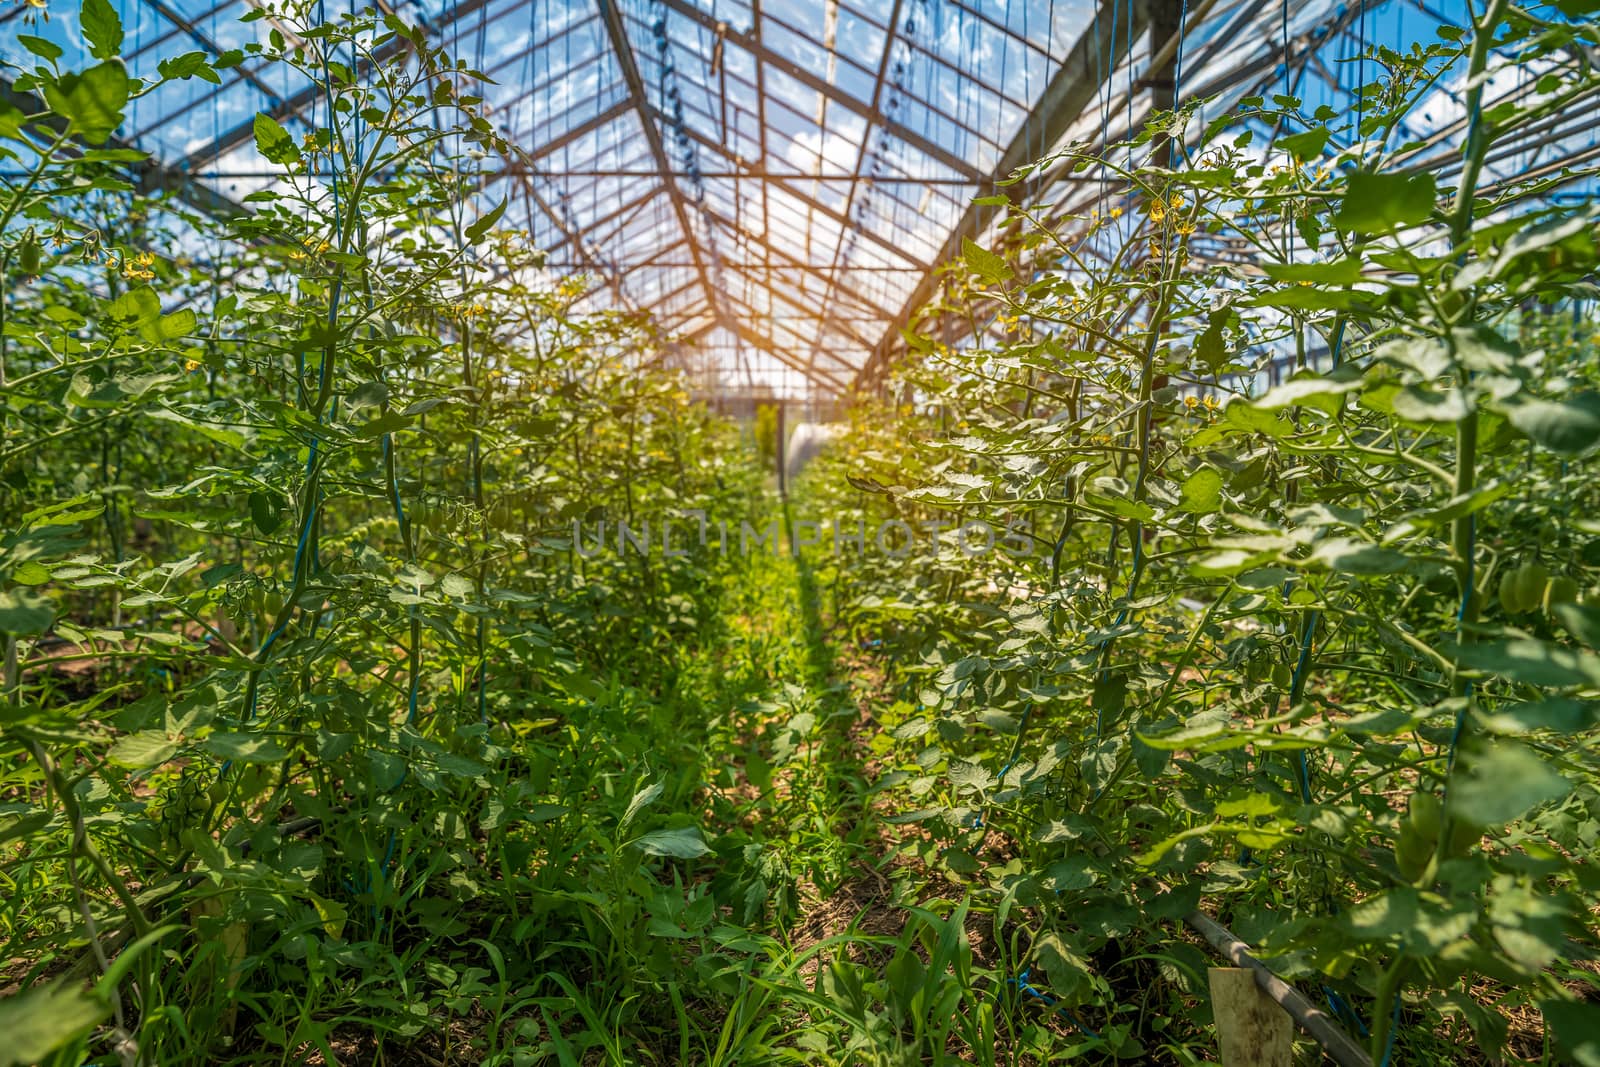 greenhouse on the farm for growing organic vegetables by Edophoto